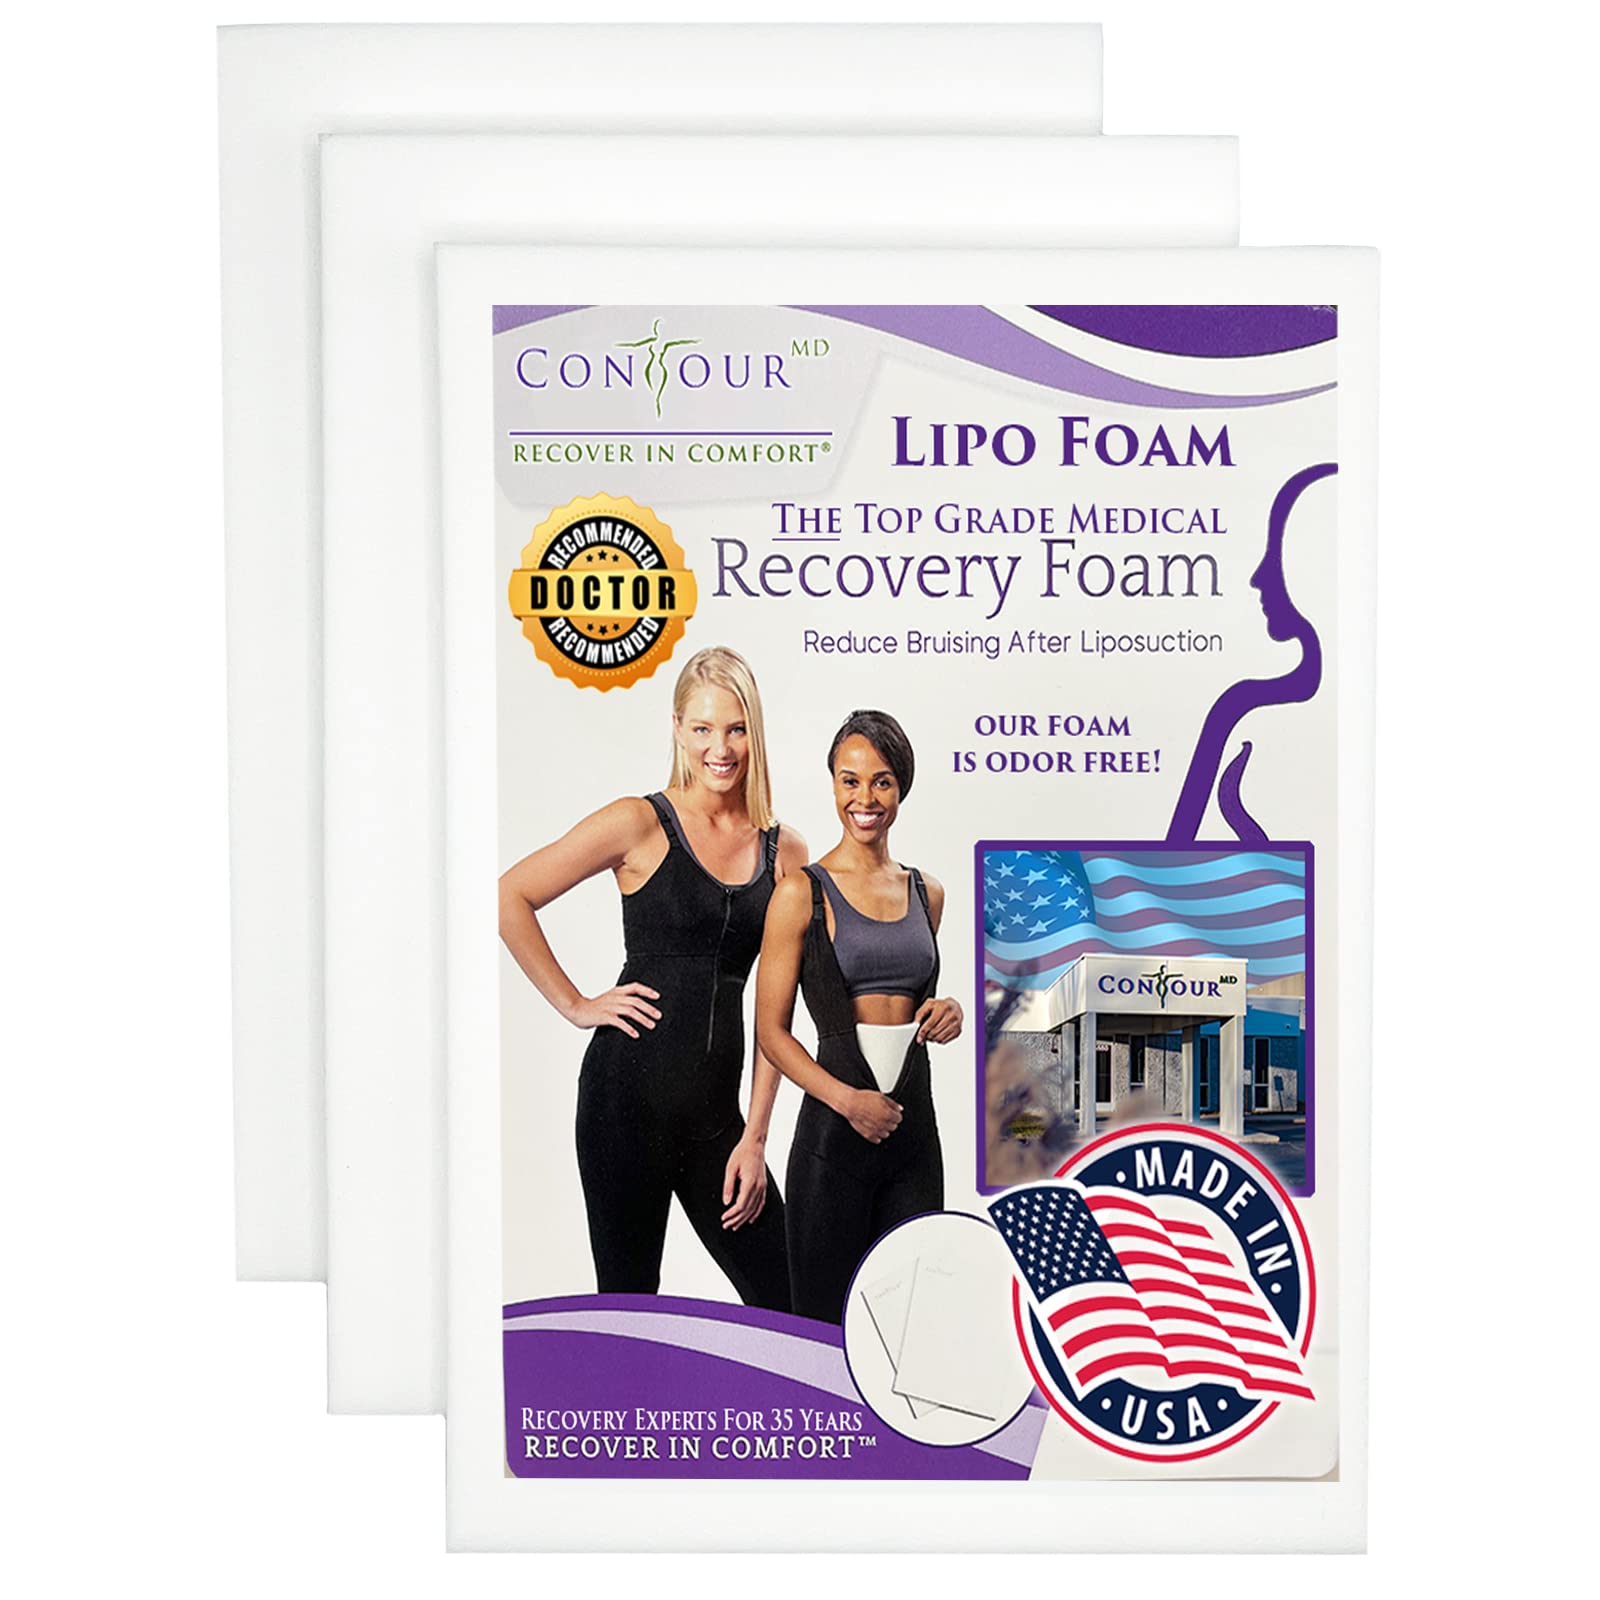 Lipo Foam Sheets for Post Surgery, Surgical Compression Garments. Top  Medical Grade for Lipo, Fajas, Ab Flattening, BBL, and more. ContourMD, 8x  11 (Lipo-1), 3 sheet